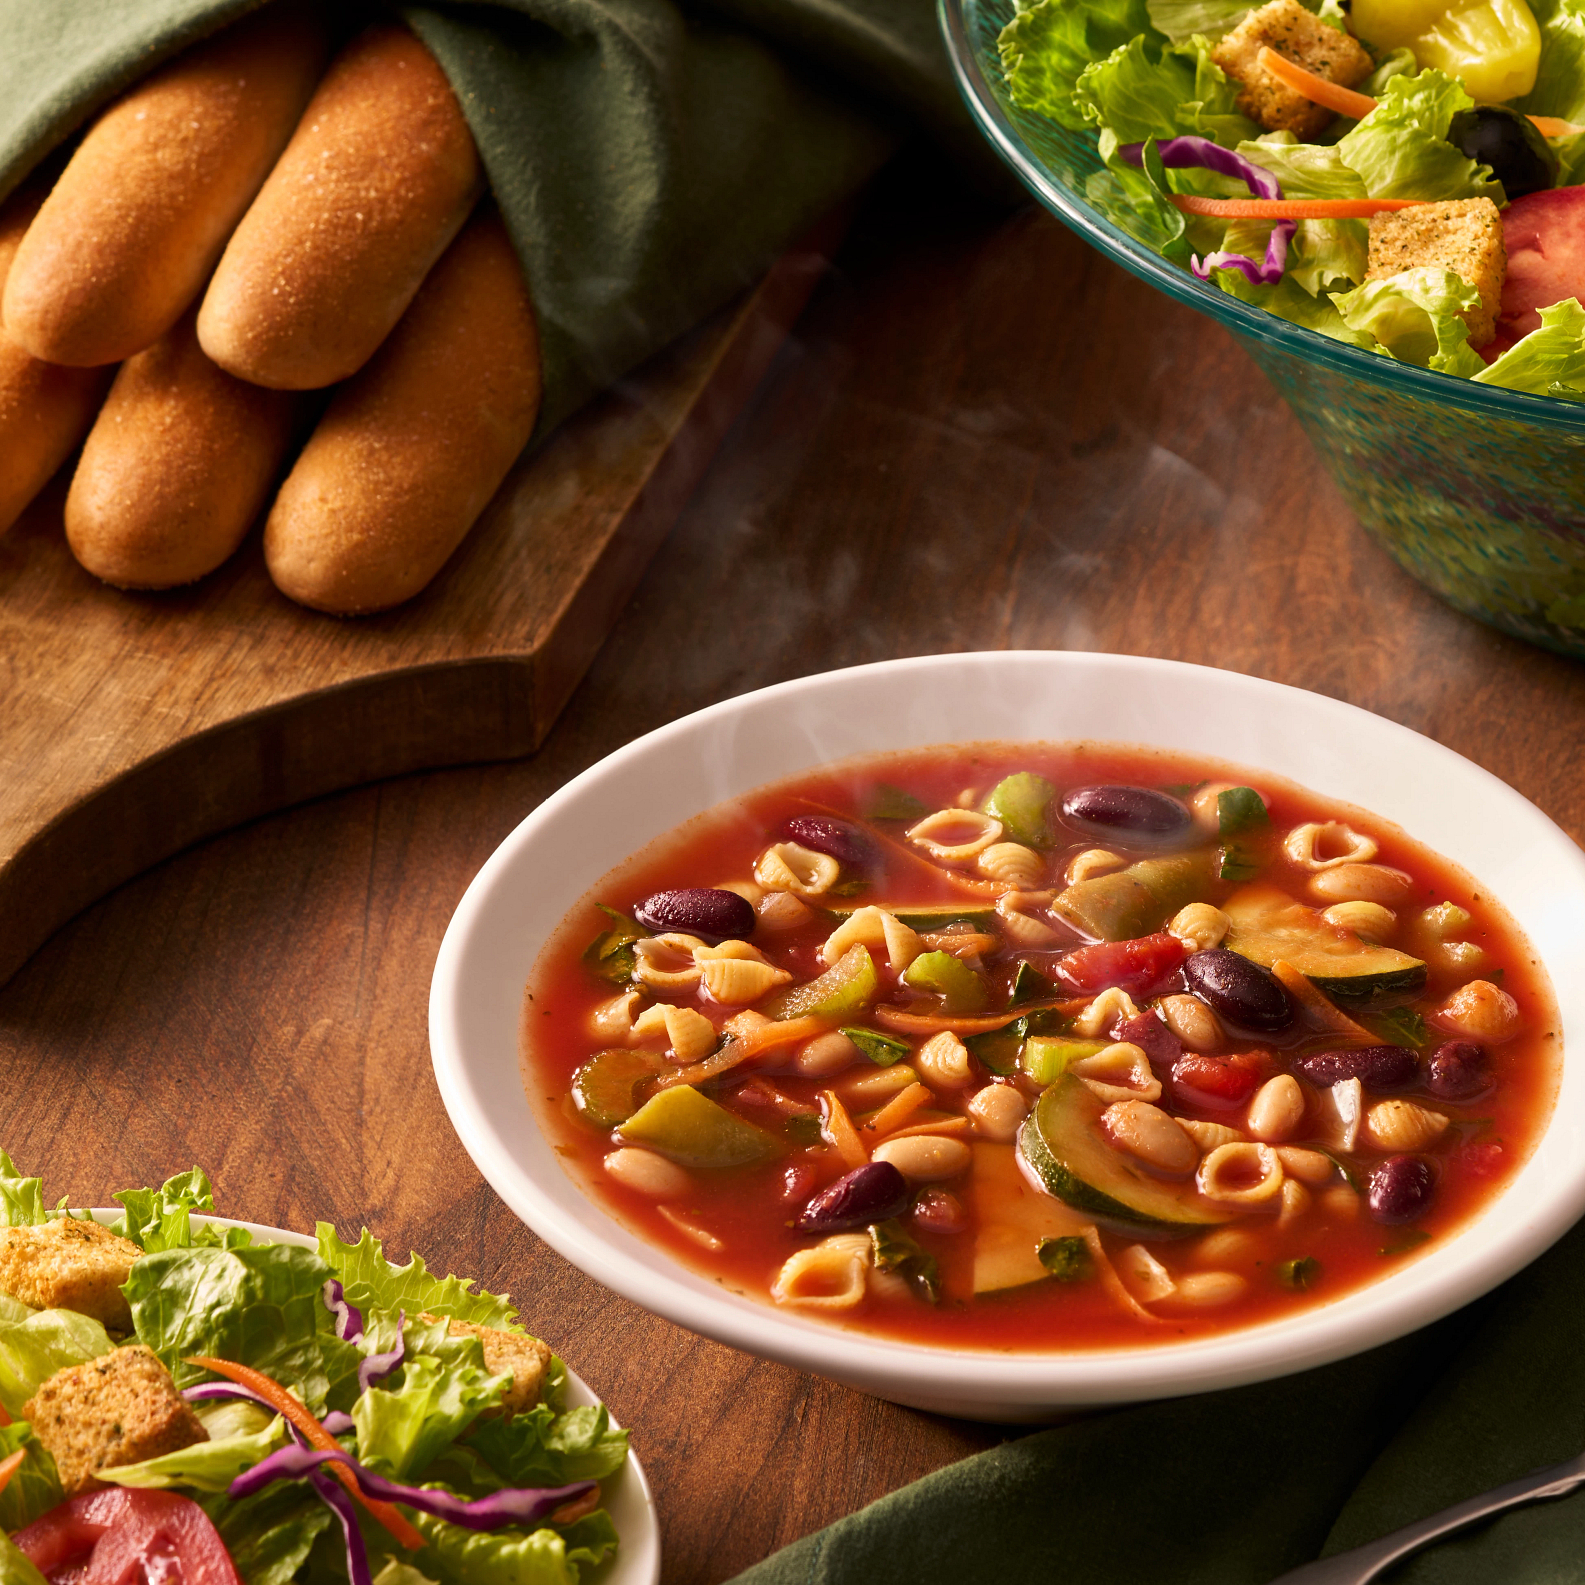 Minestrone: Fresh vegetables, beans and pasta in a light tomato broth.